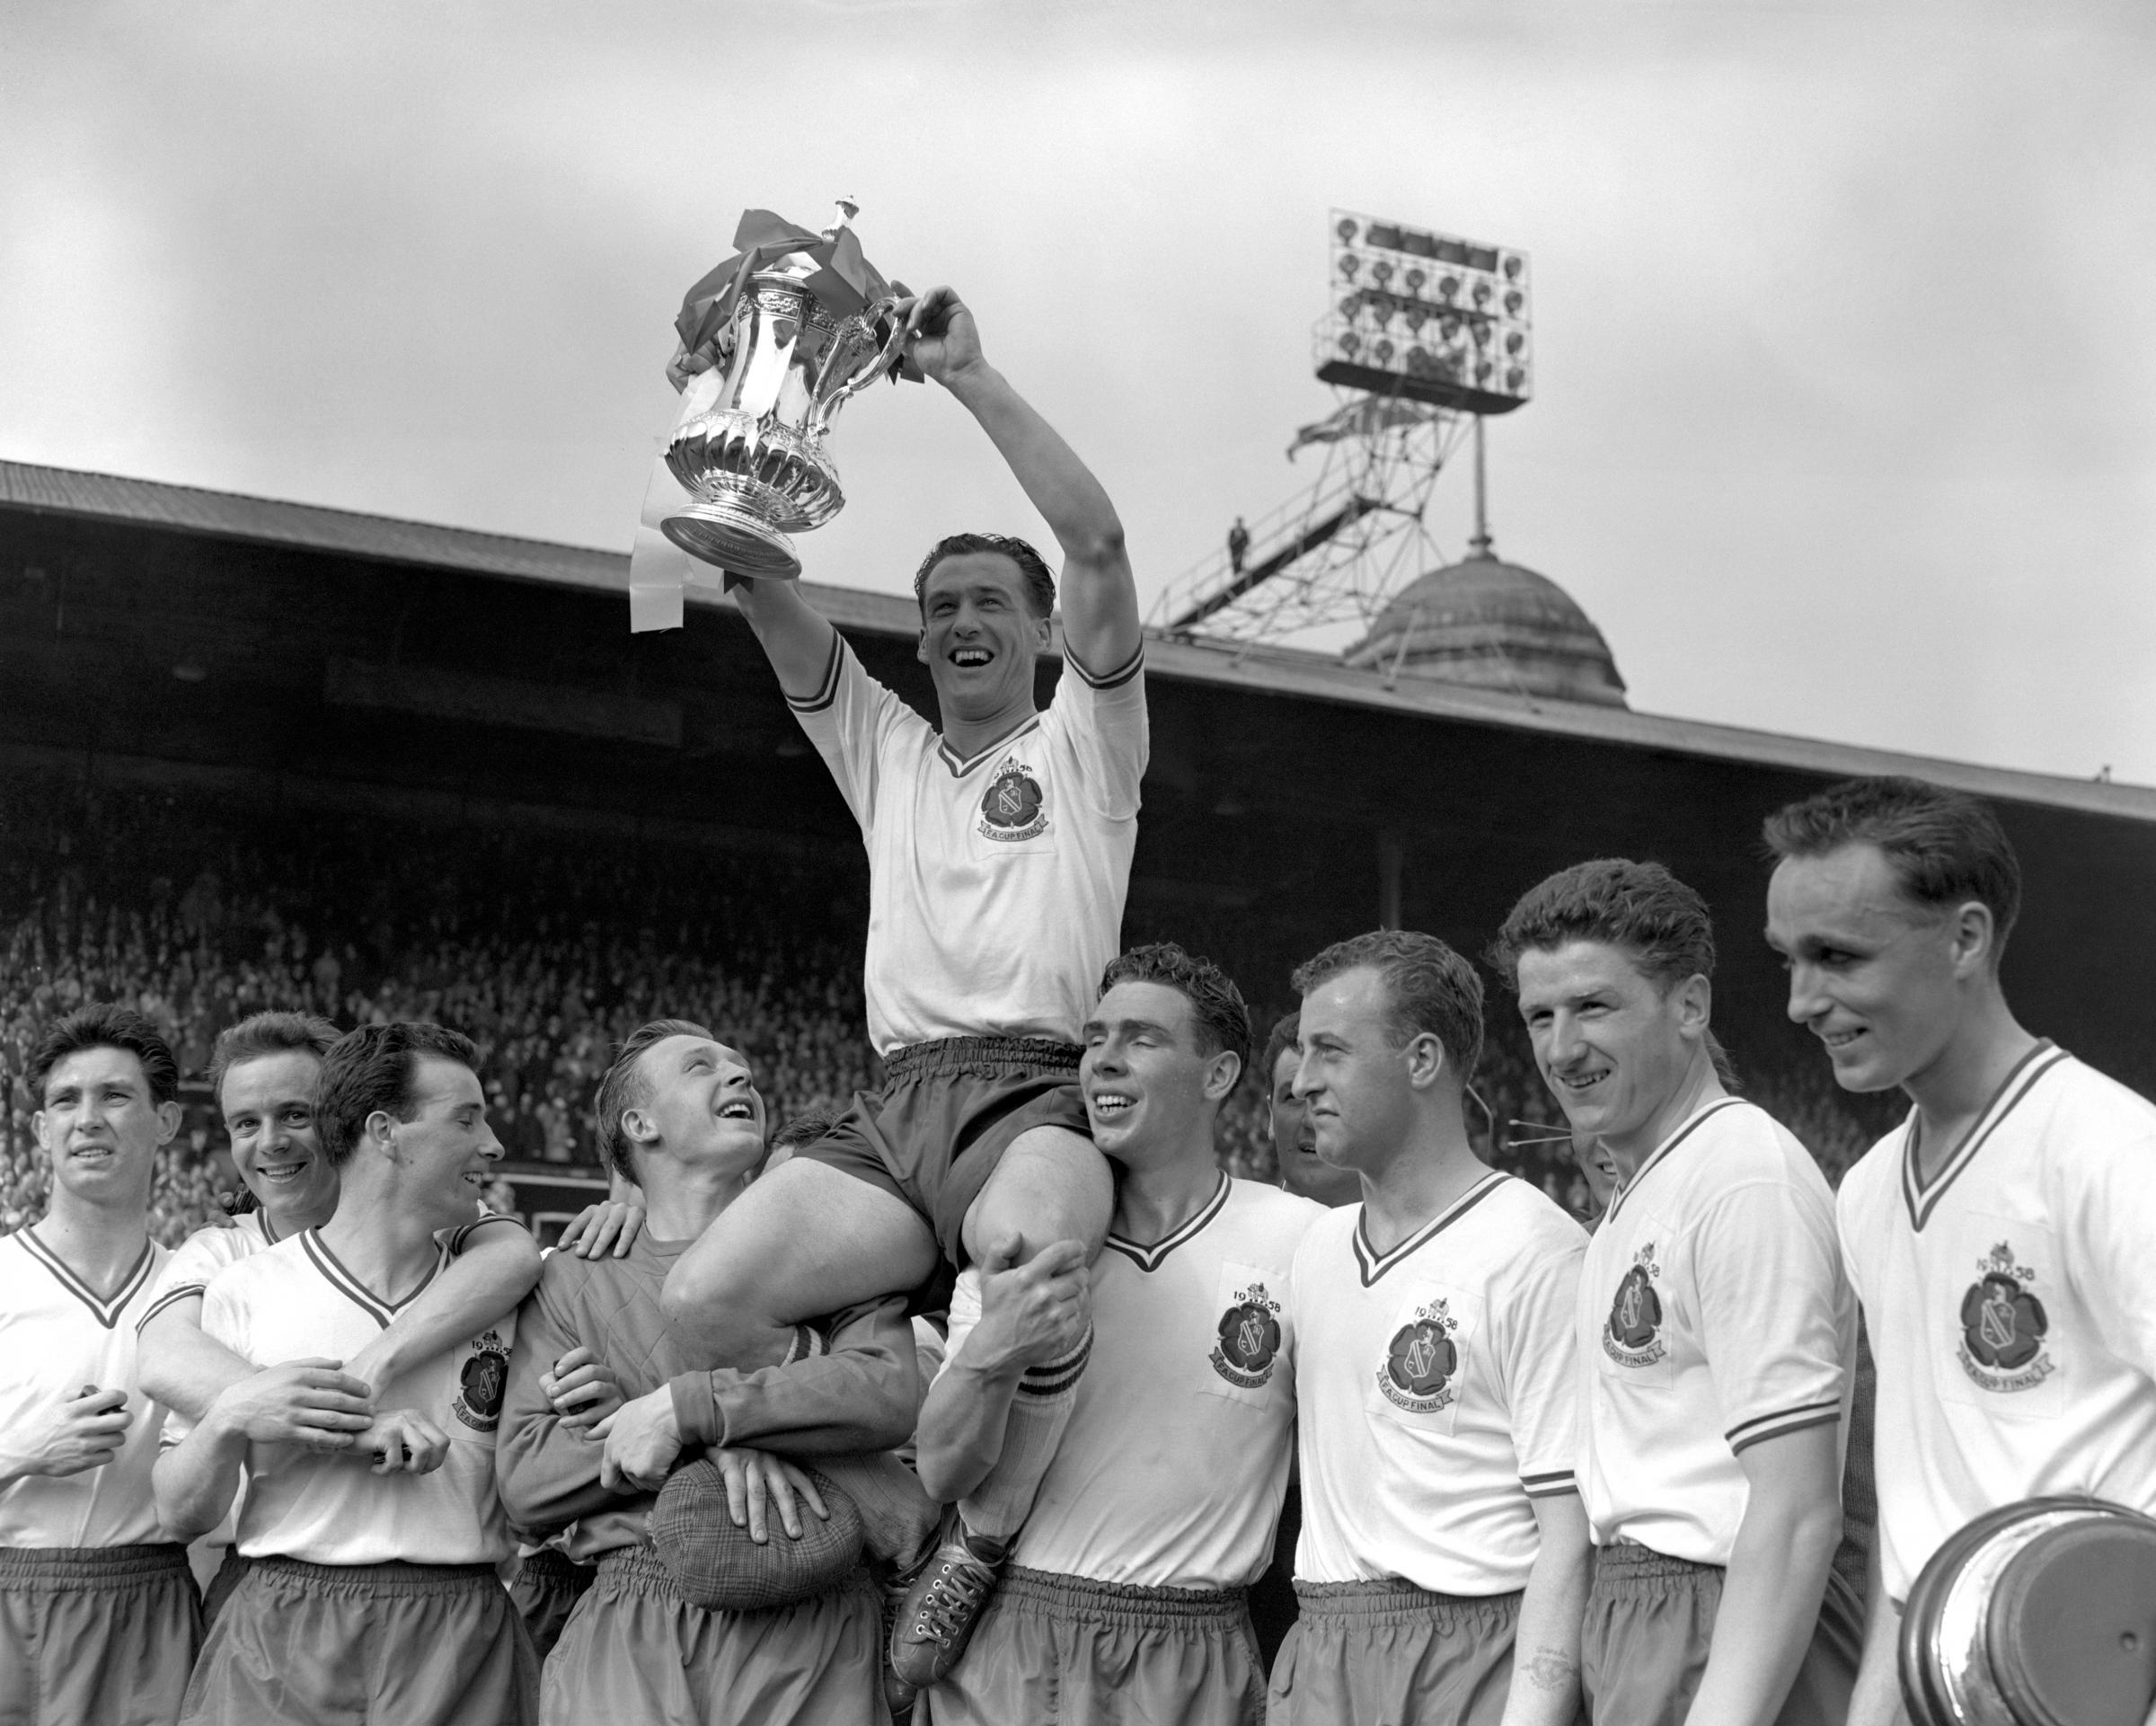 Where do Bolton Wanderers and Oxford rank on Wembley appearances?